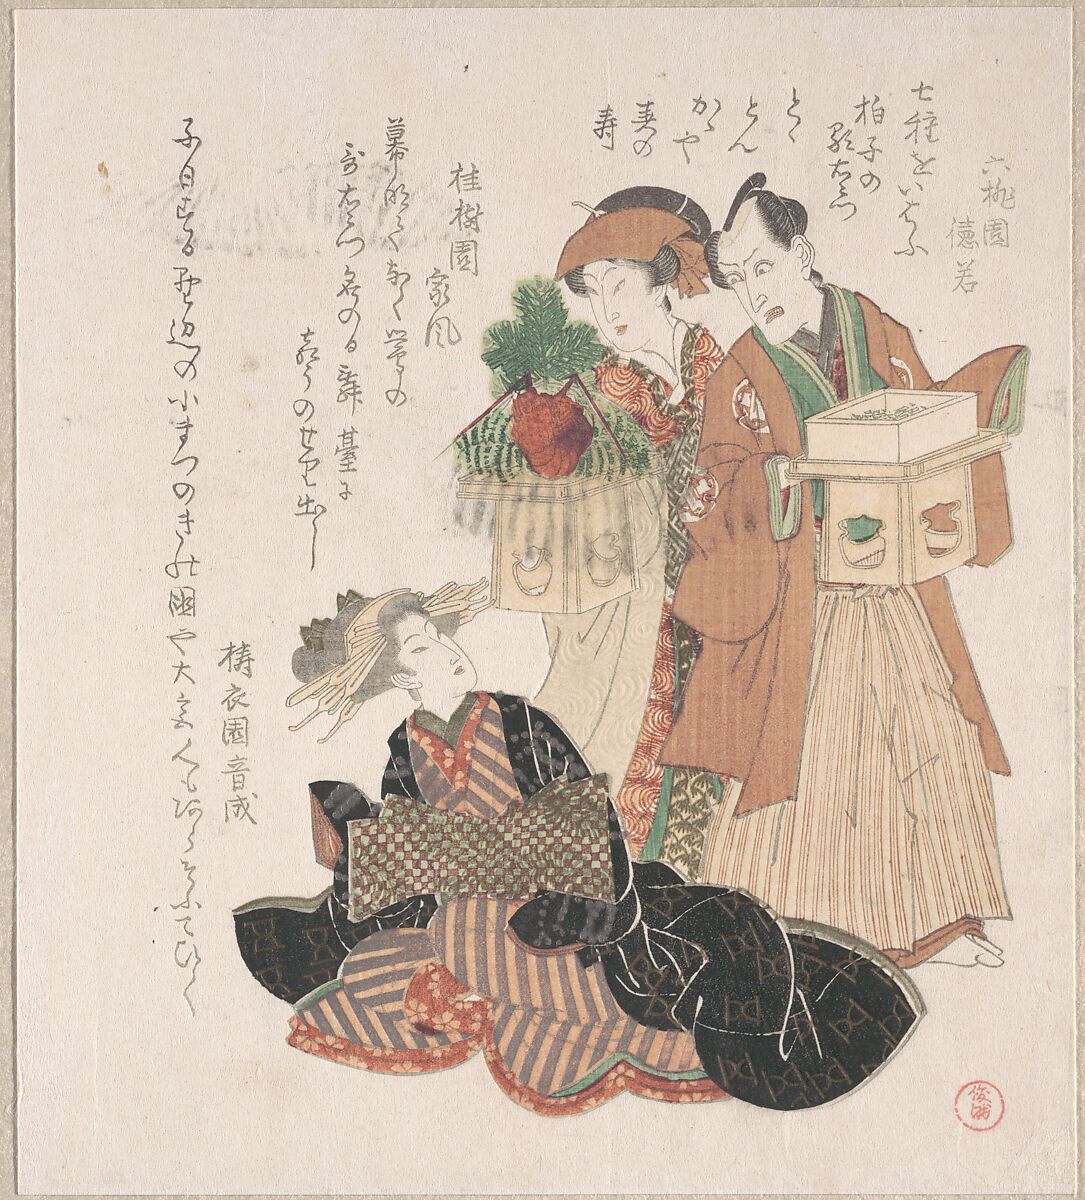 Actor Nakamura Utayemon with Two Women Preparing for the New Year Ceremony, Utagawa Toyokuni I (Japanese, 1769–1825) (?), Part of an album of woodblock prints (surimono); ink and color on paper, Japan 